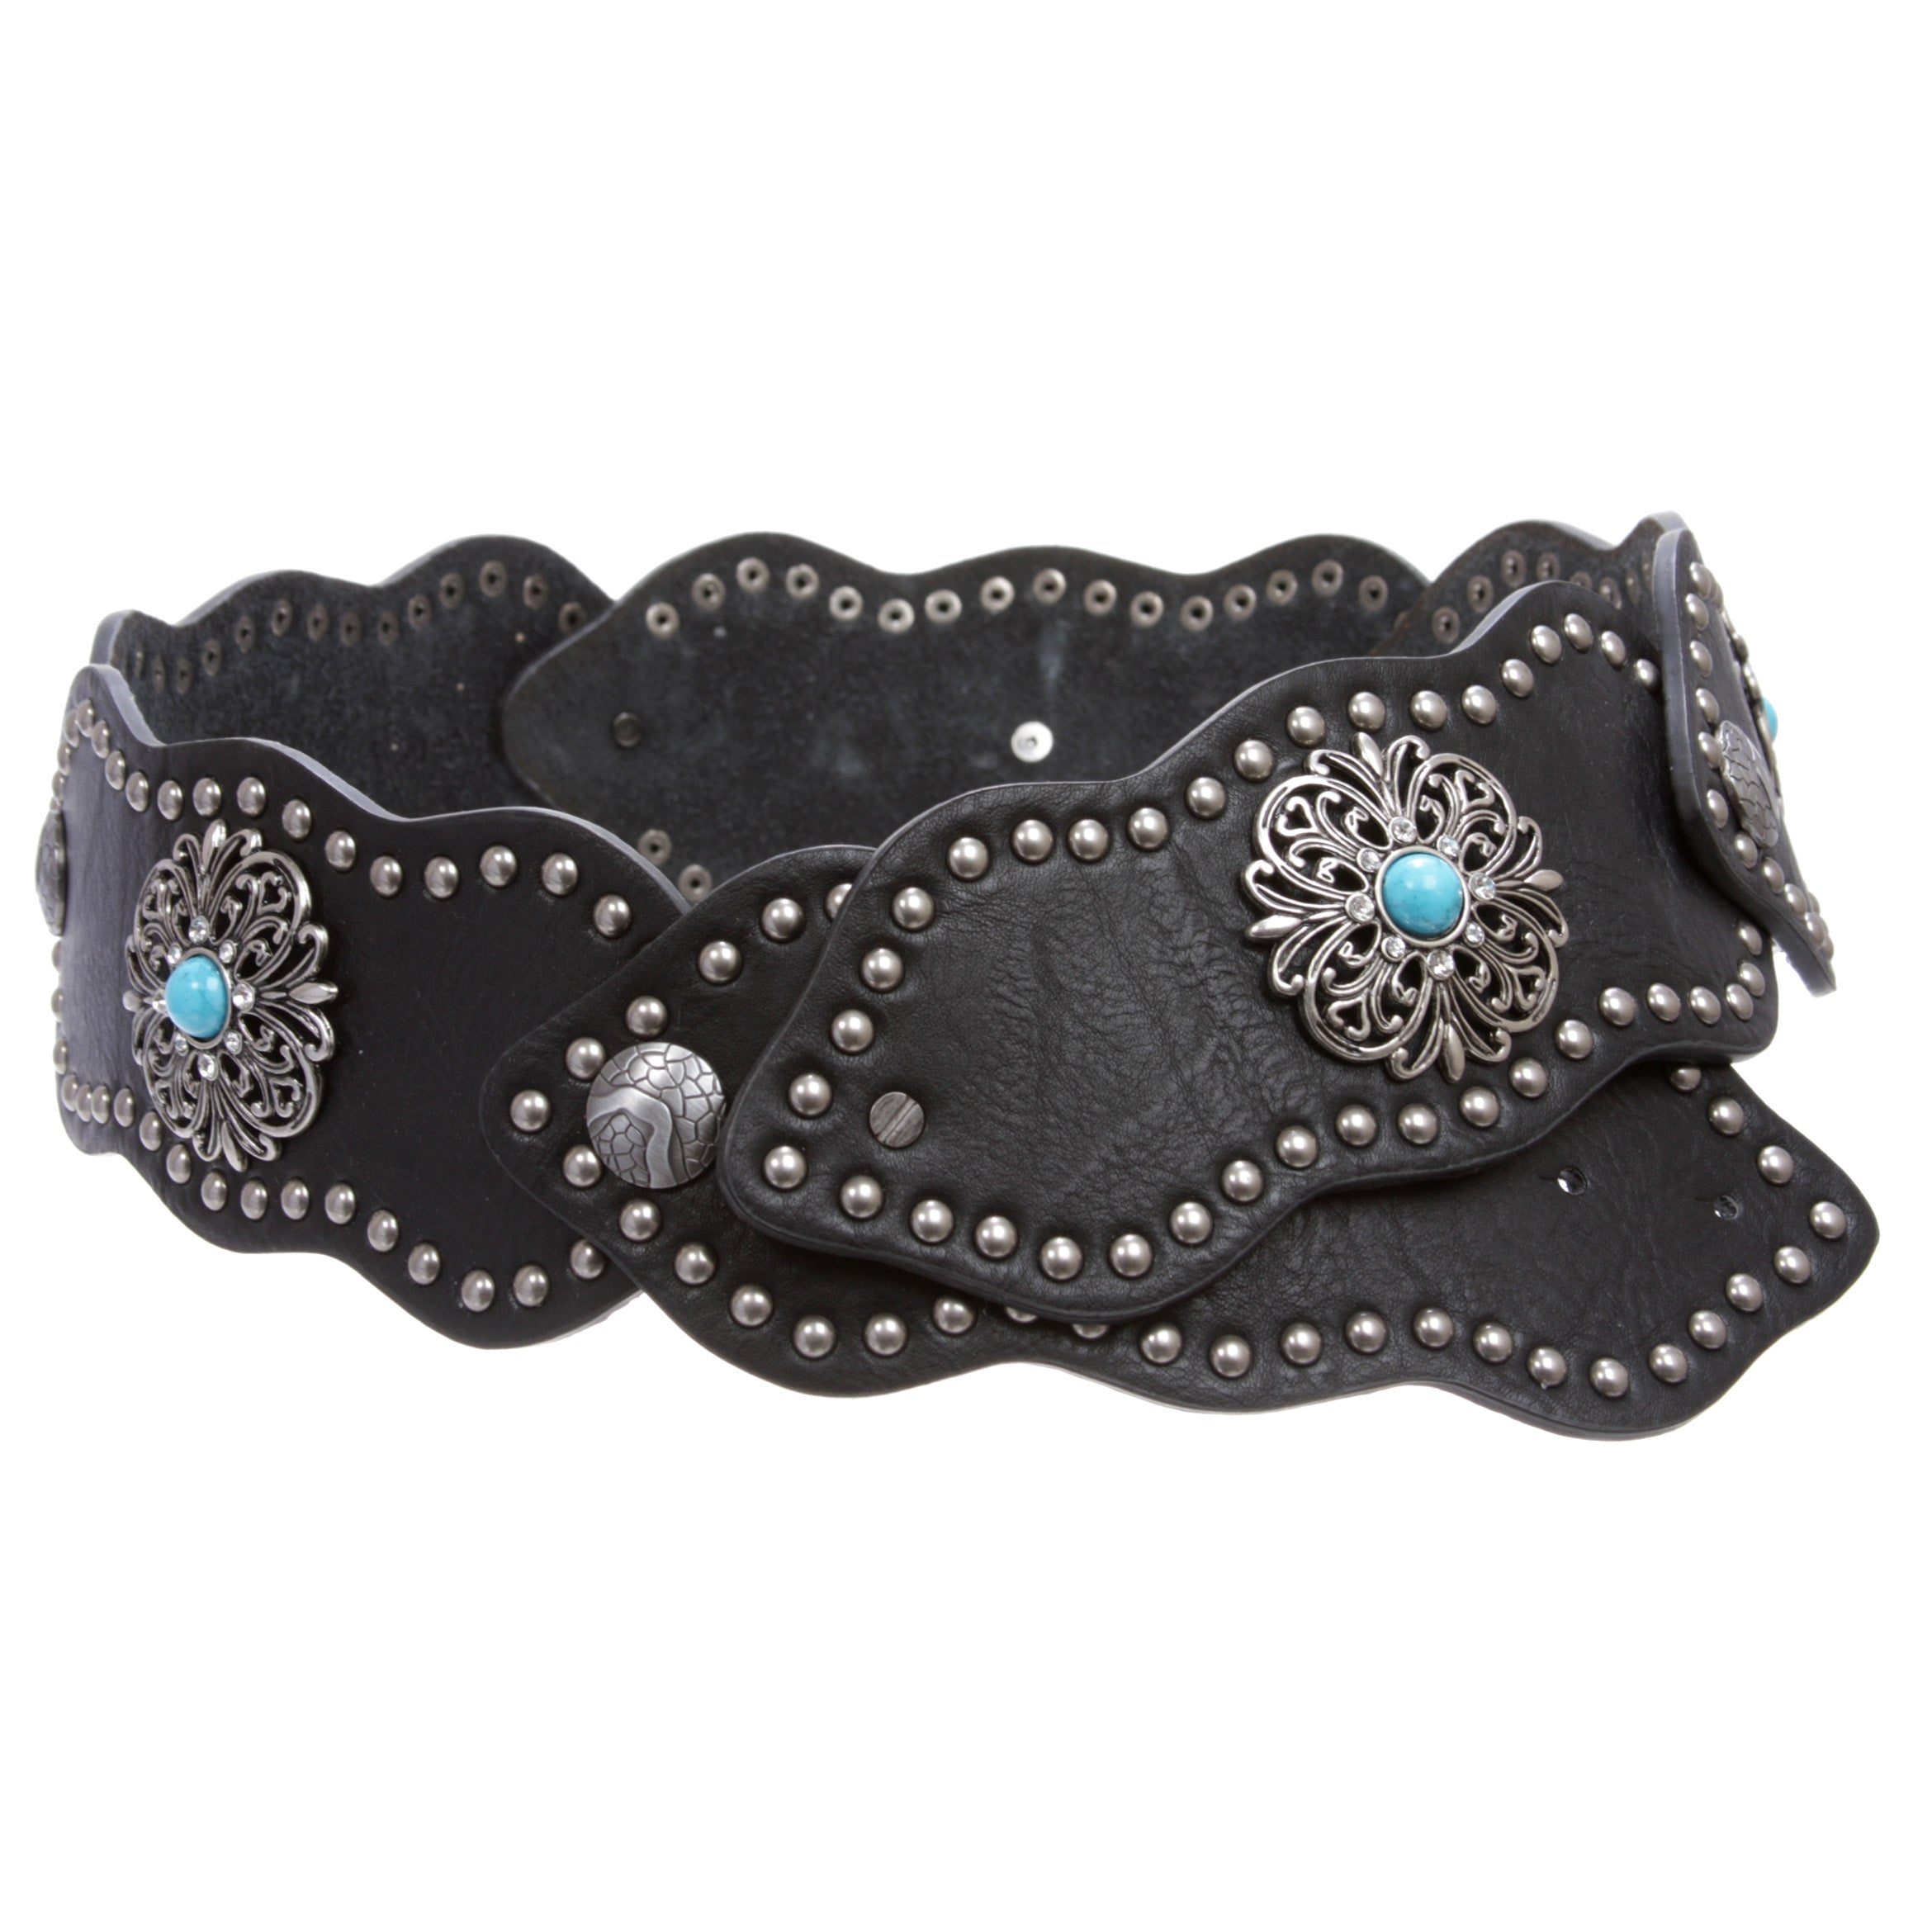 Women's 3" (75mm) Wide Boho Link Turquoise Silver Studded Leather Belt